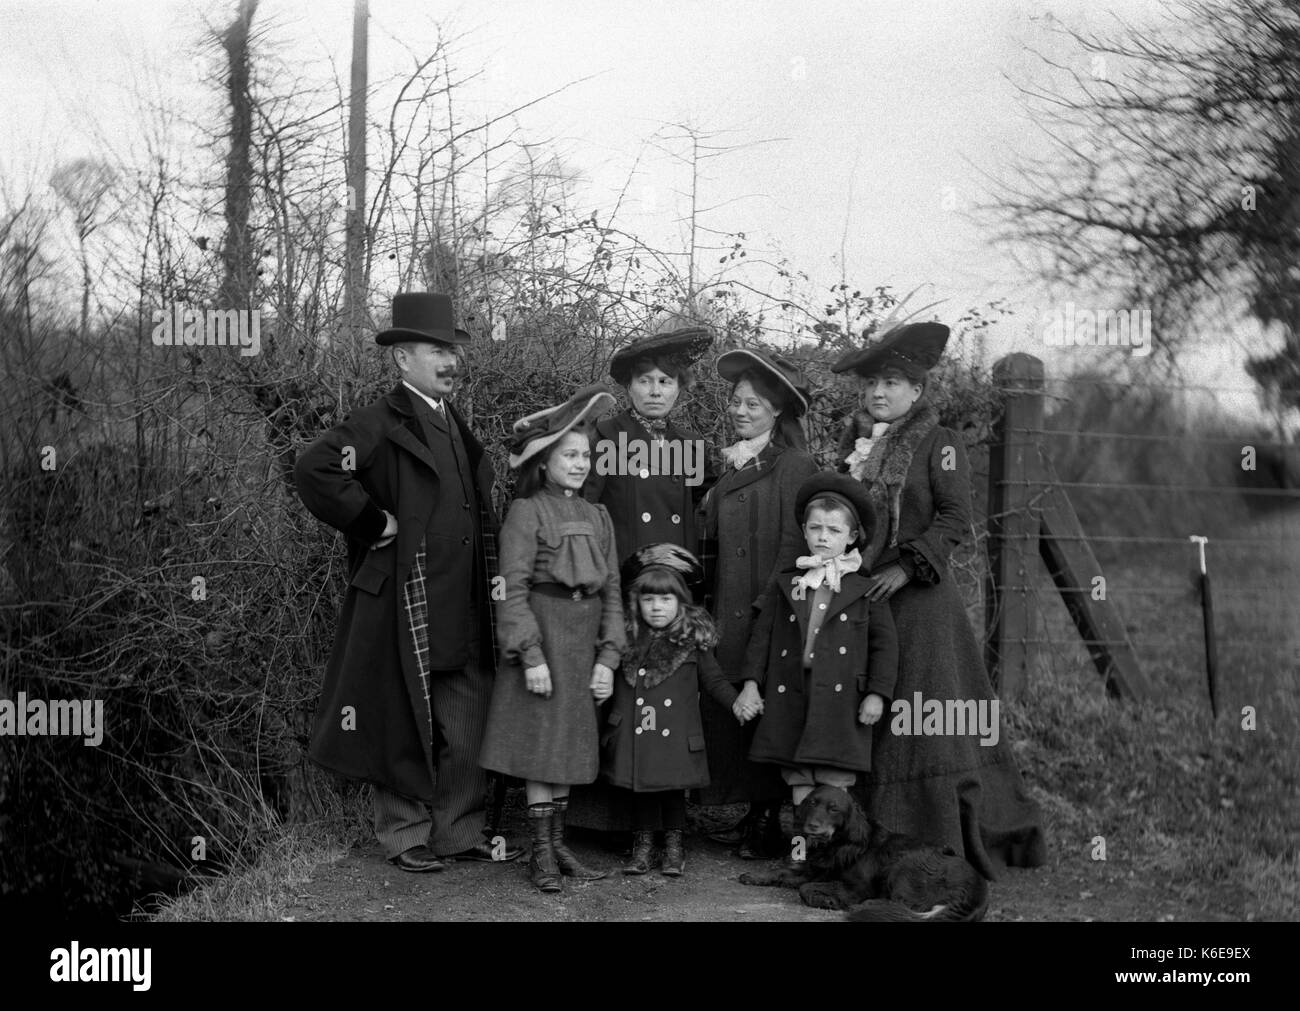 AJAXNETPHOTO. 1891-1910 (APPROX). SAINT-LO REGION, NORMANDY.FRANCE. - A FAMILY GROUP POSING FOR THE CAMERA IN A COUNTRY LANDSCAPE.  PHOTOGRAPHER:UNKNOWN © DIGITAL IMAGE COPYRIGHT AJAX VINTAGE PICTURE LIBRARY SOURCE: AJAX VINTAGE PICTURE LIBRARY COLLECTION REF:AVL FRA 1890 04 Stock Photo